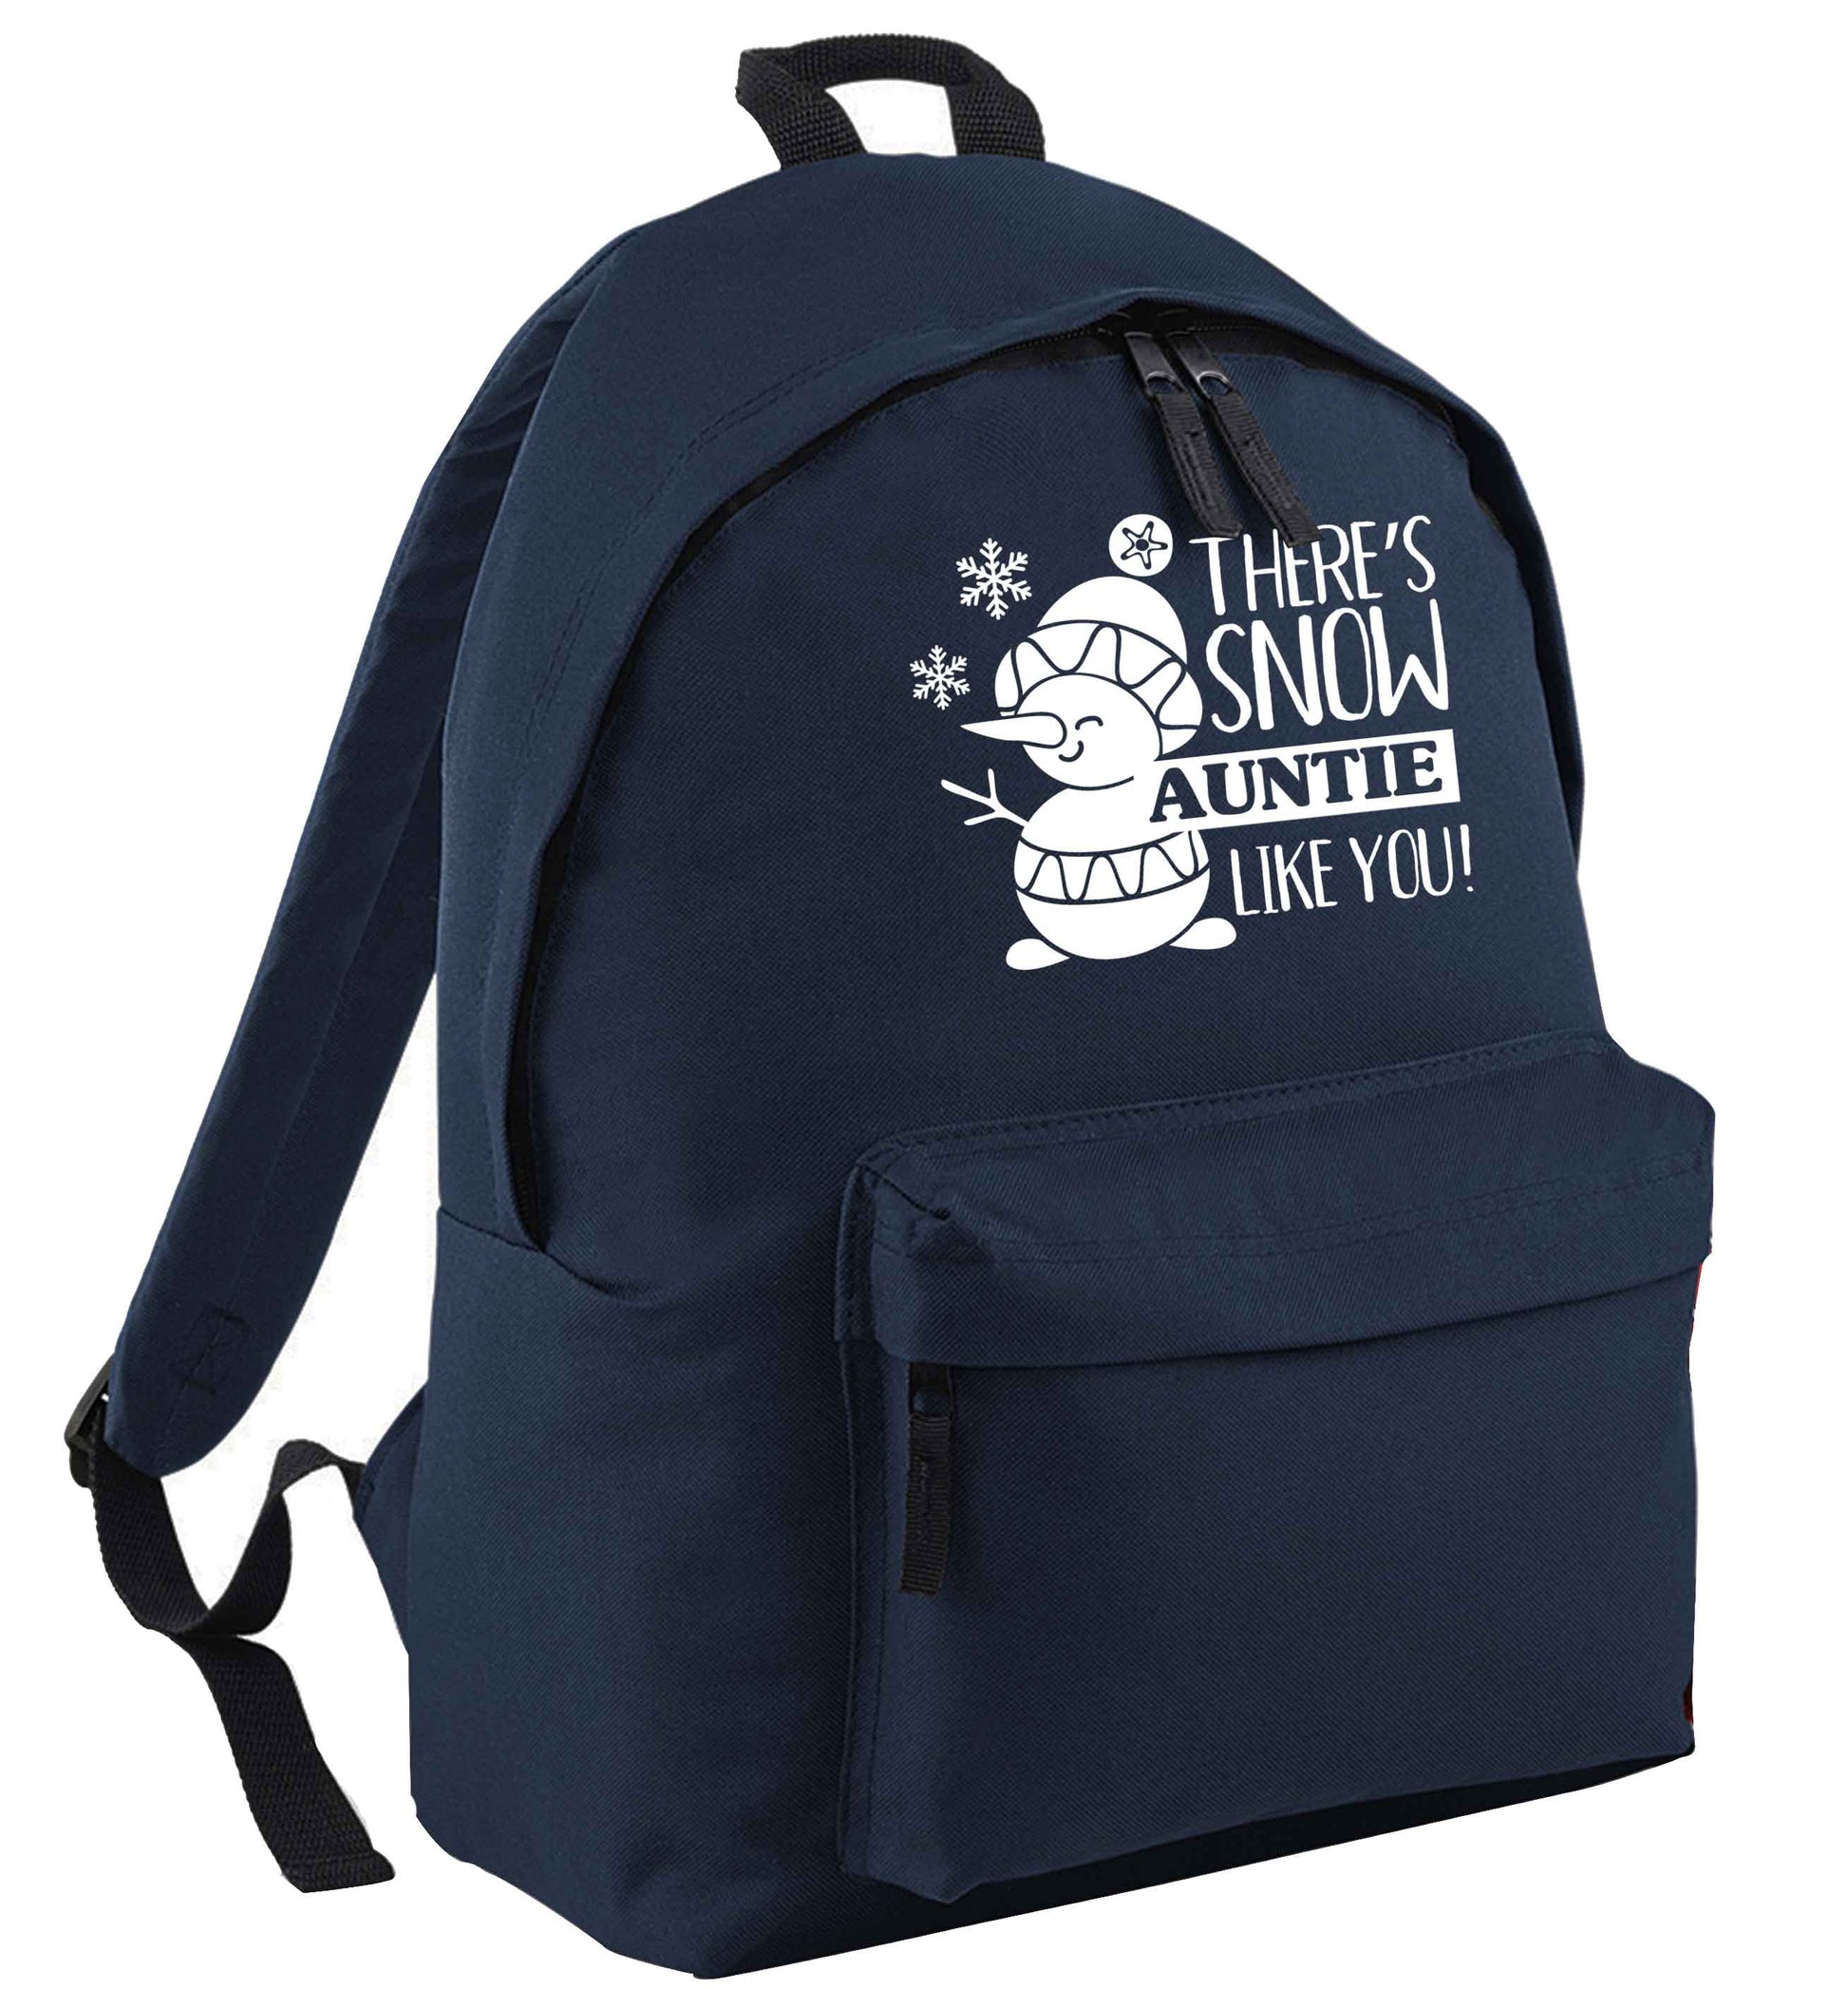 There's snow auntie like you navy adults backpack